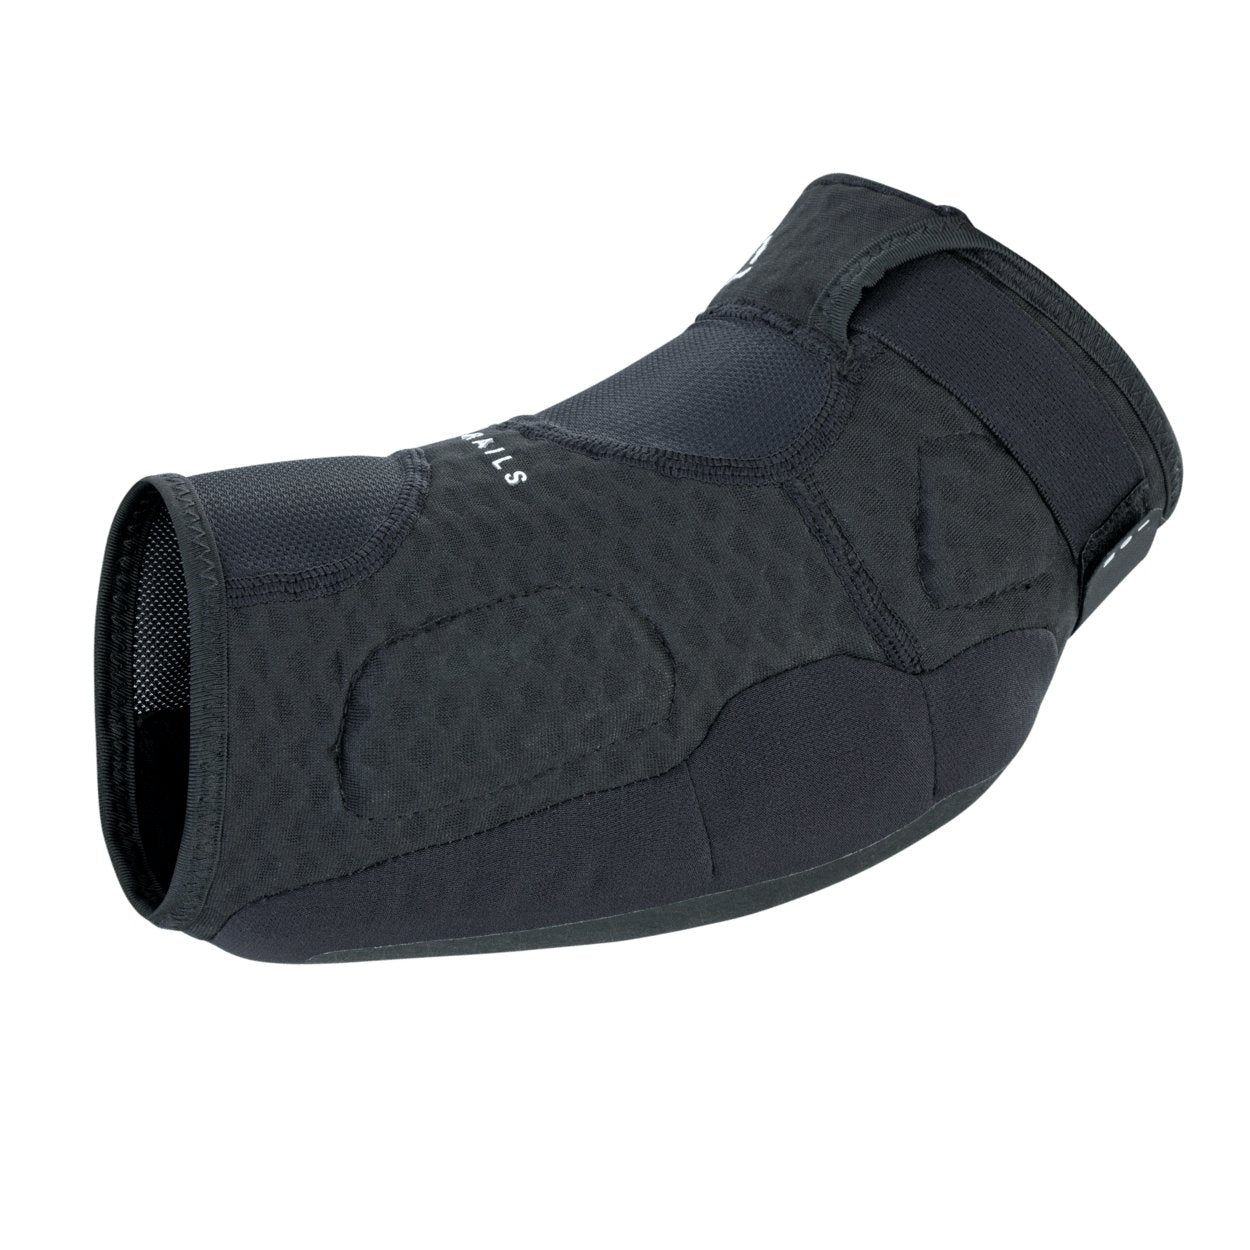 ION MTB Elbow pads E-Lite 2024 - Worthing Watersports - 9010583029986 - Body Armor - ION Bike